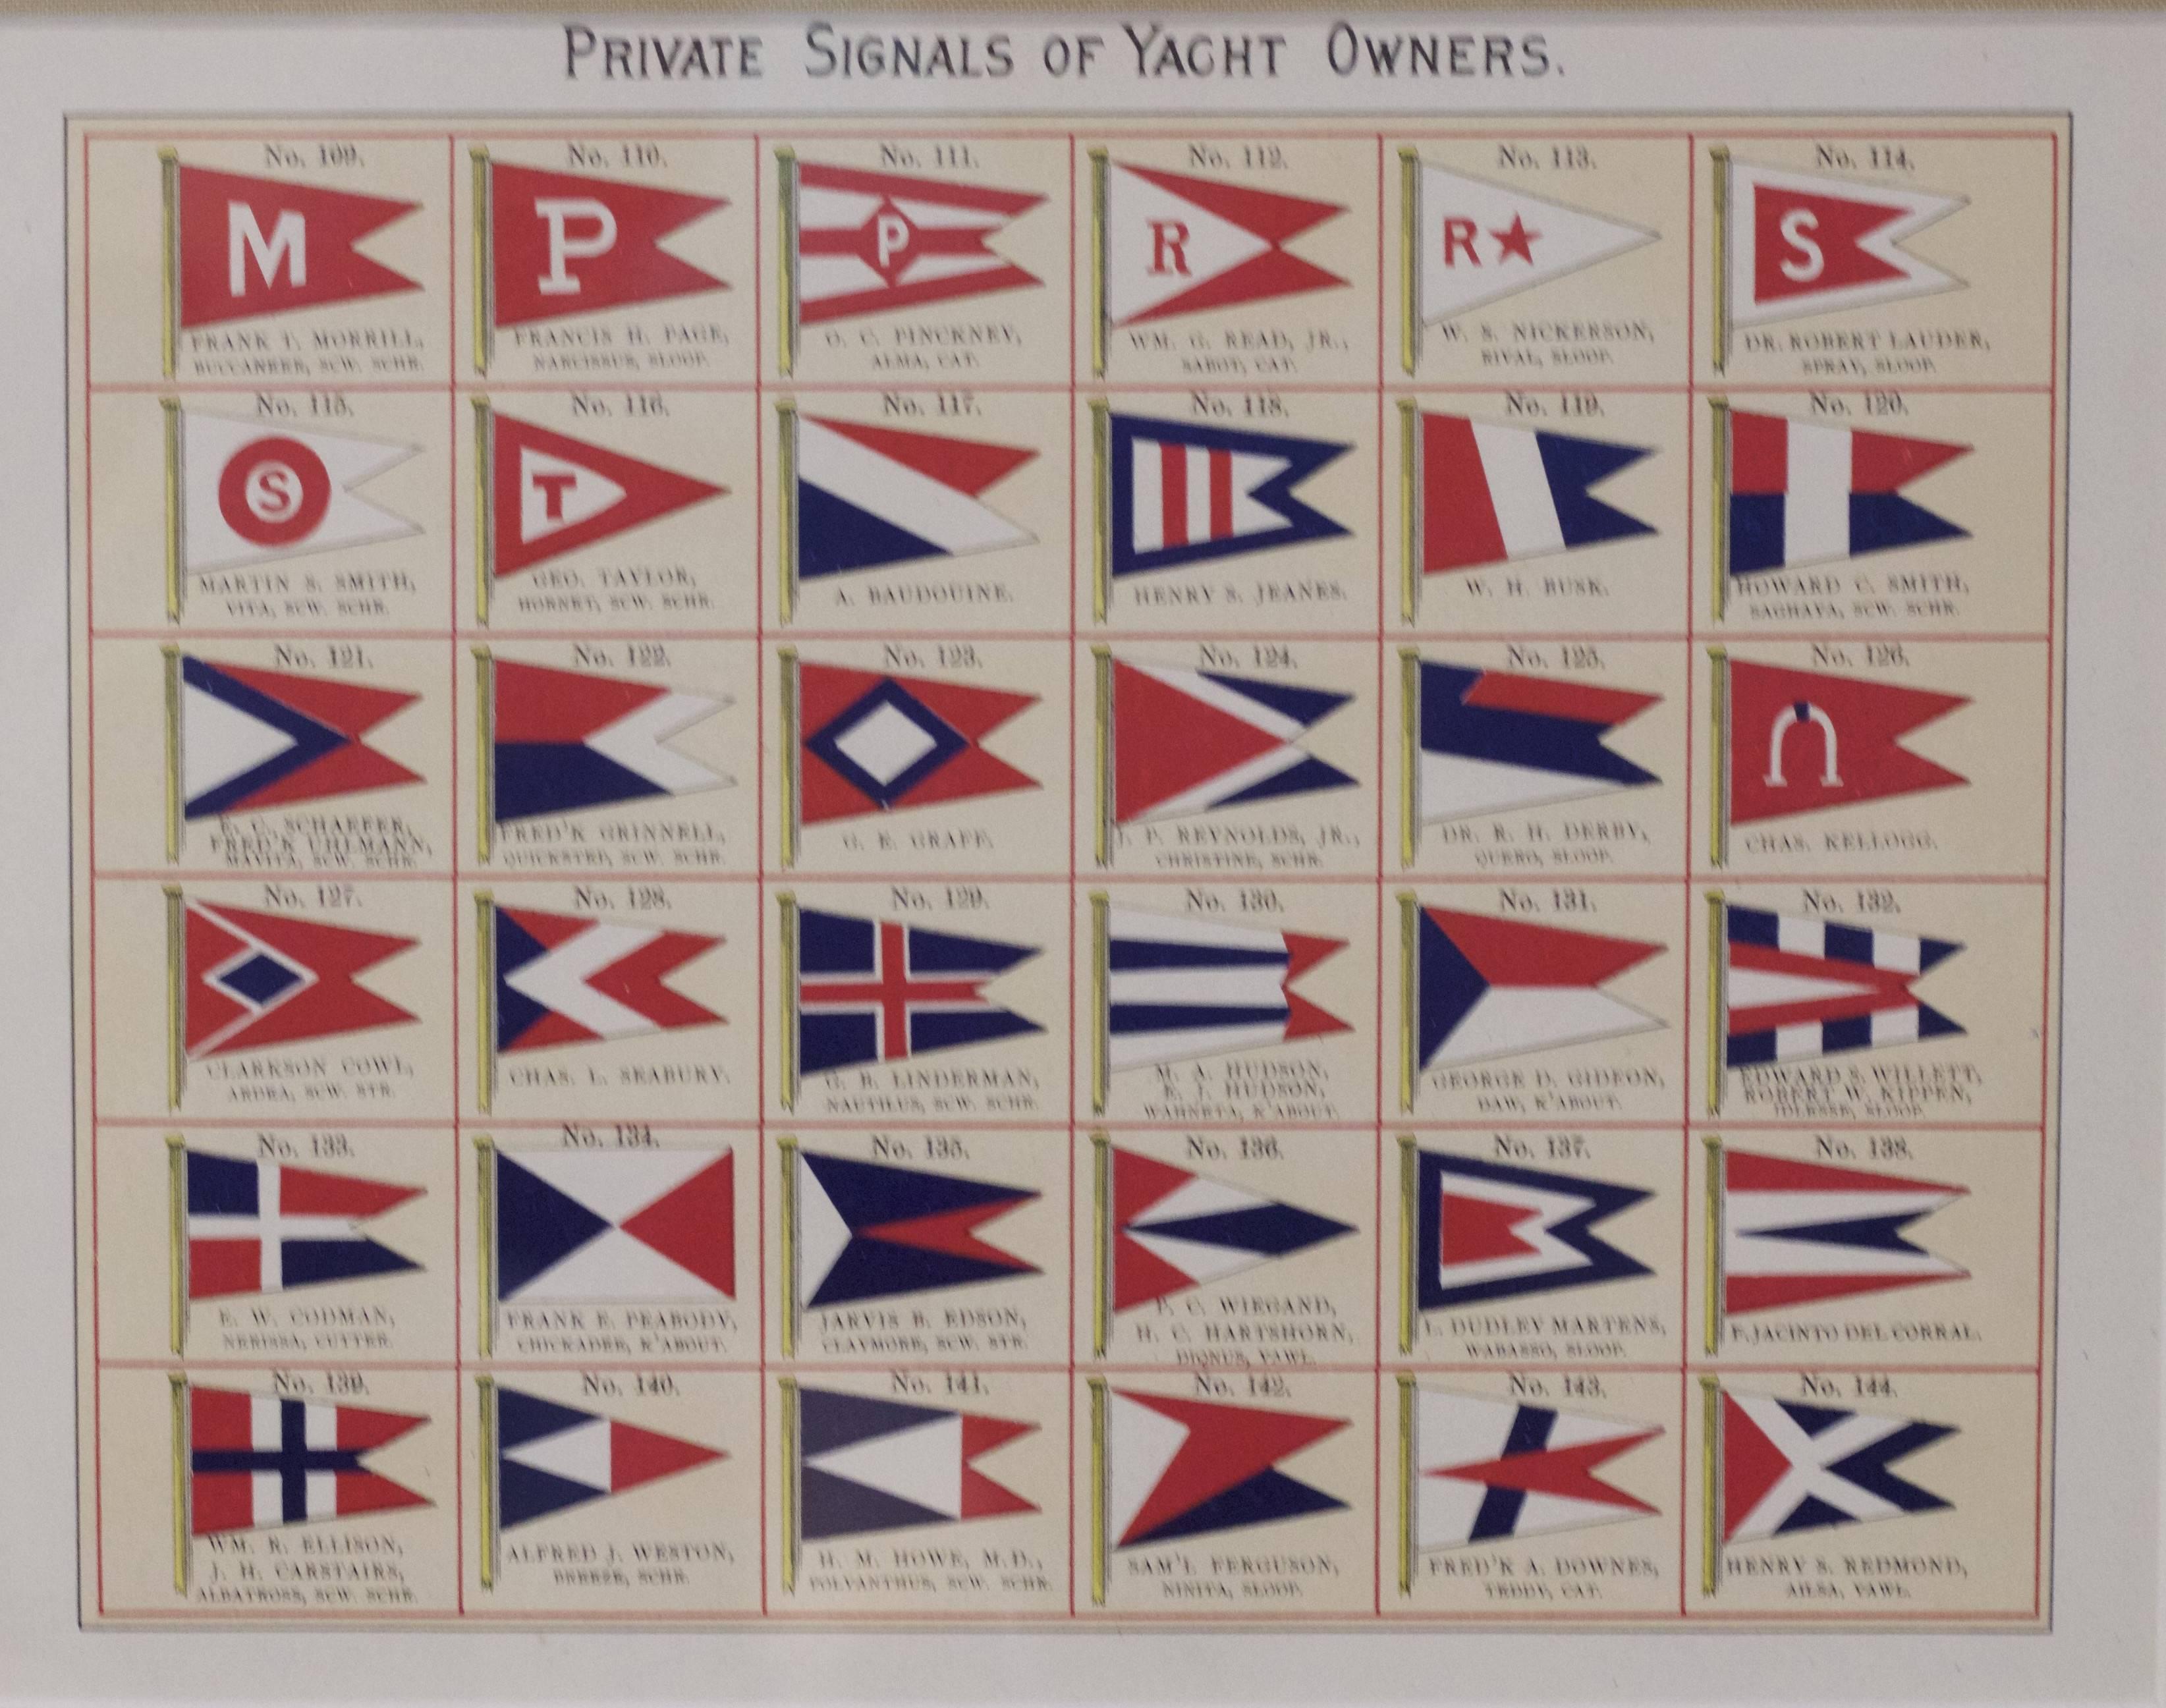 Framed print showing yacht club flags from the early 1900s with linen backing. Includes Easter yacht club of Marblehead. Dimensions: 15" L x 13" H.